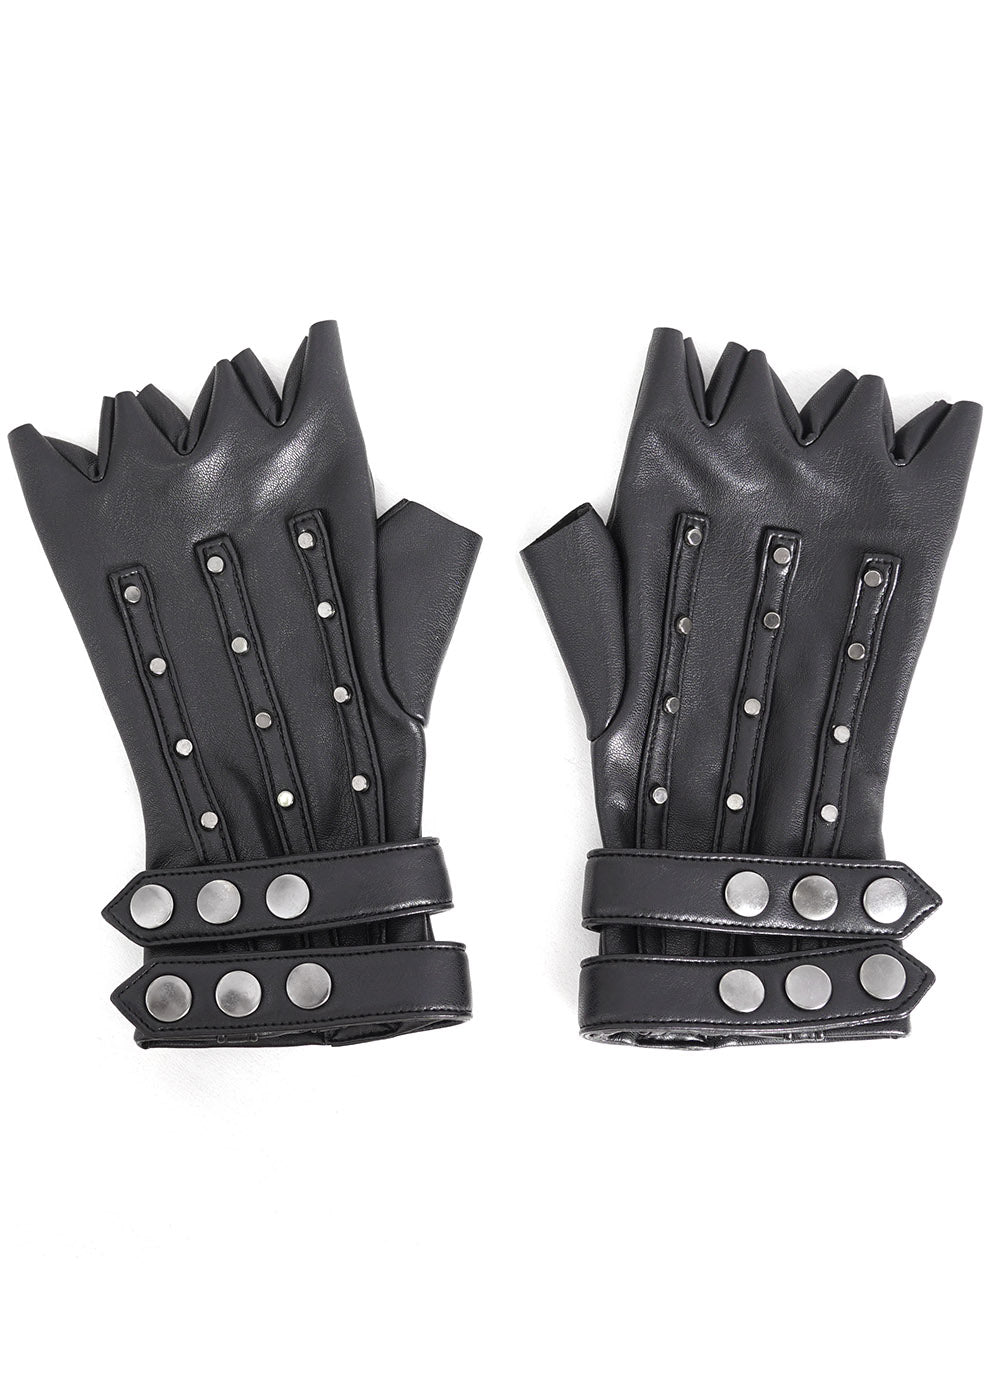 gothic motorcycle gloves